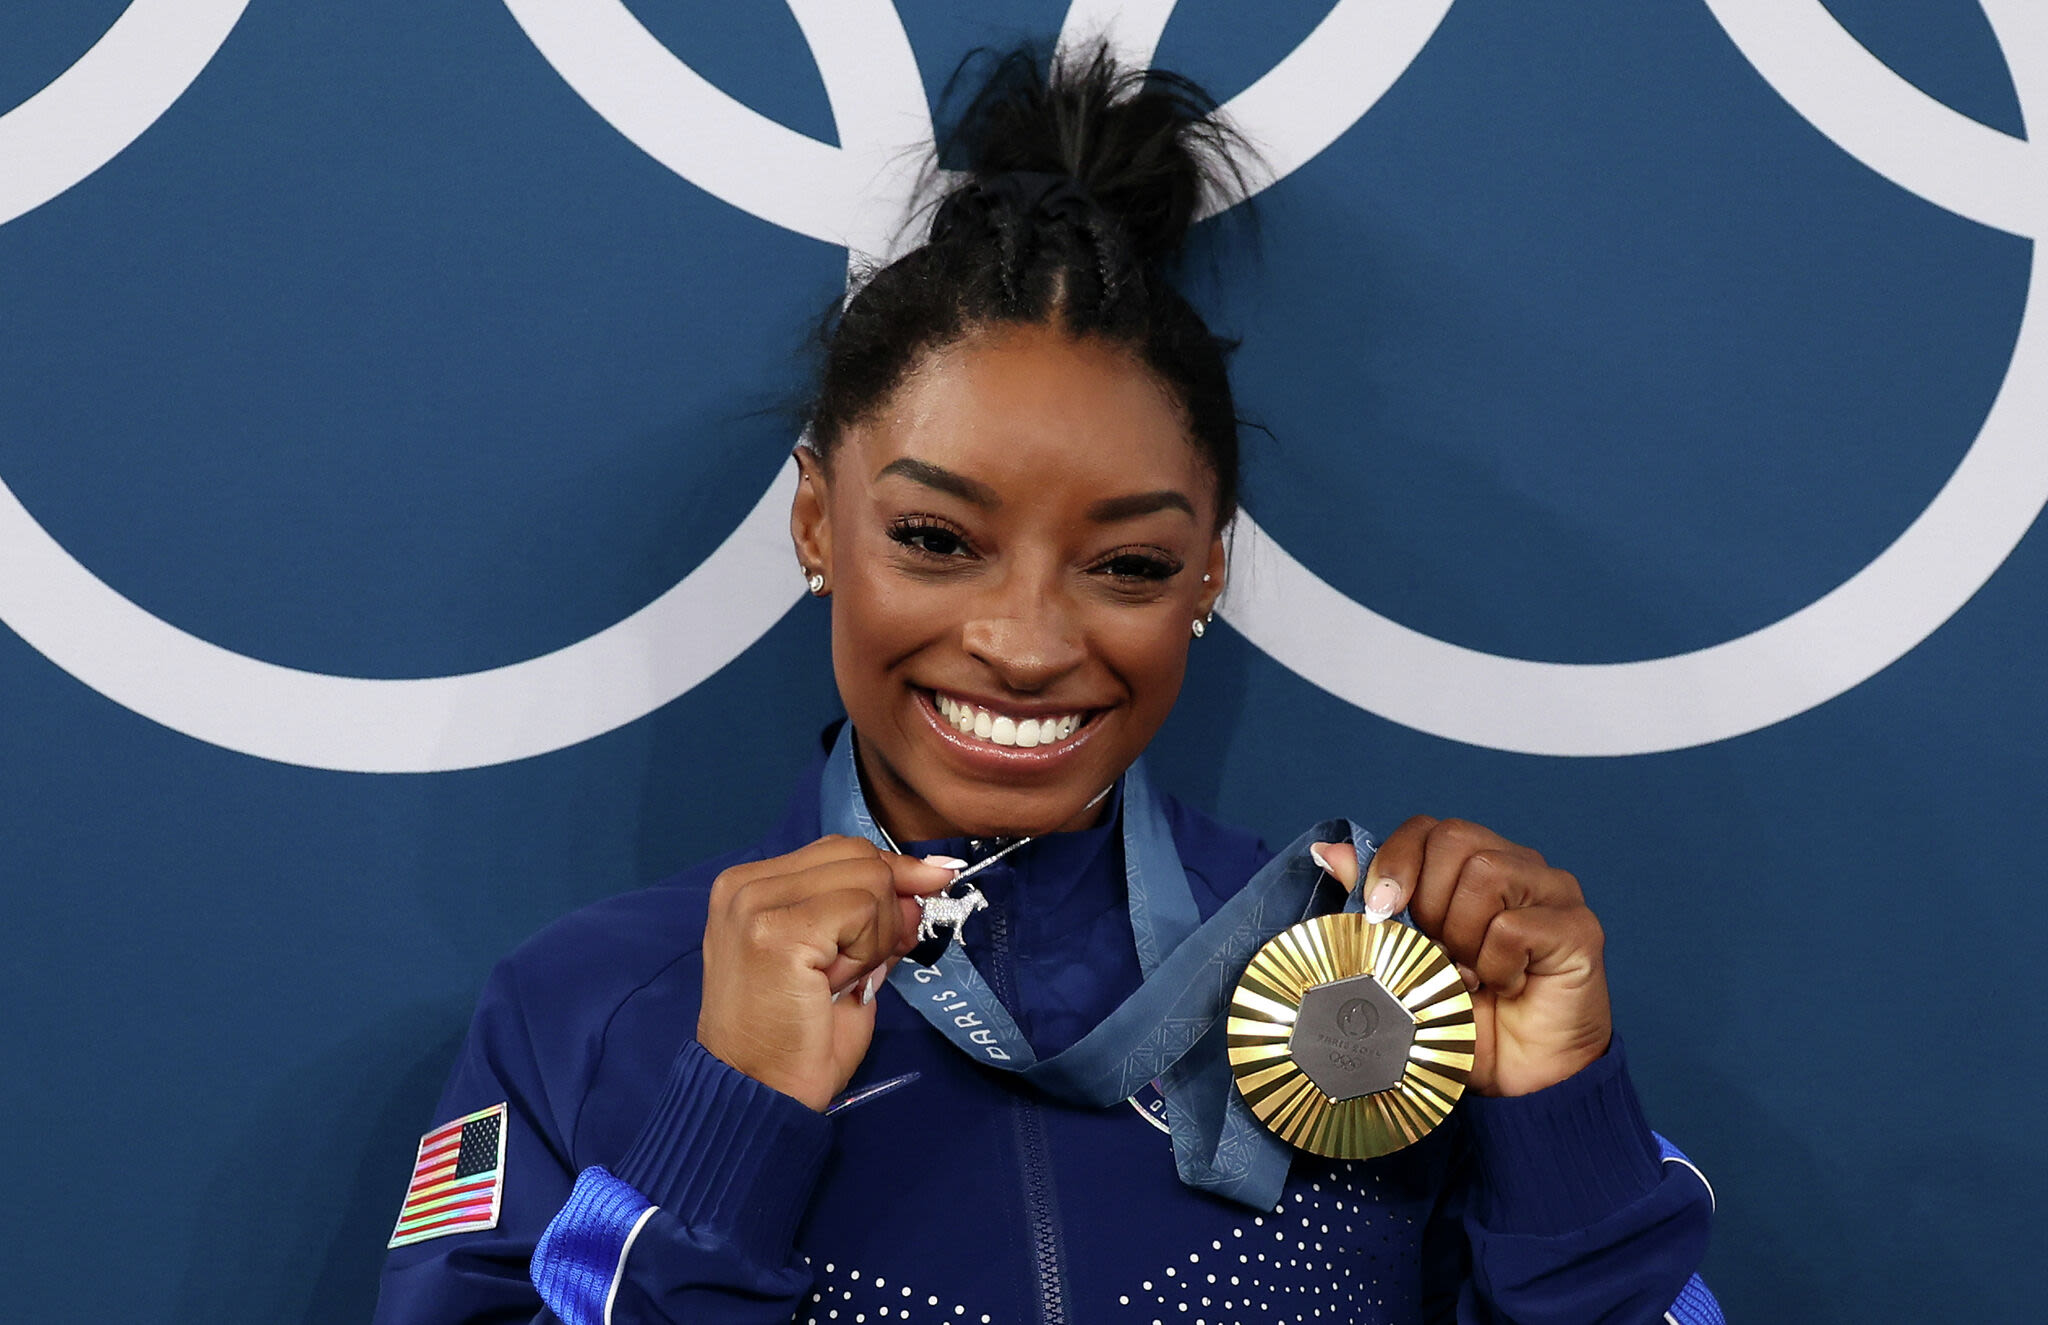 Simone Biles sported some extra bling at the Olympics